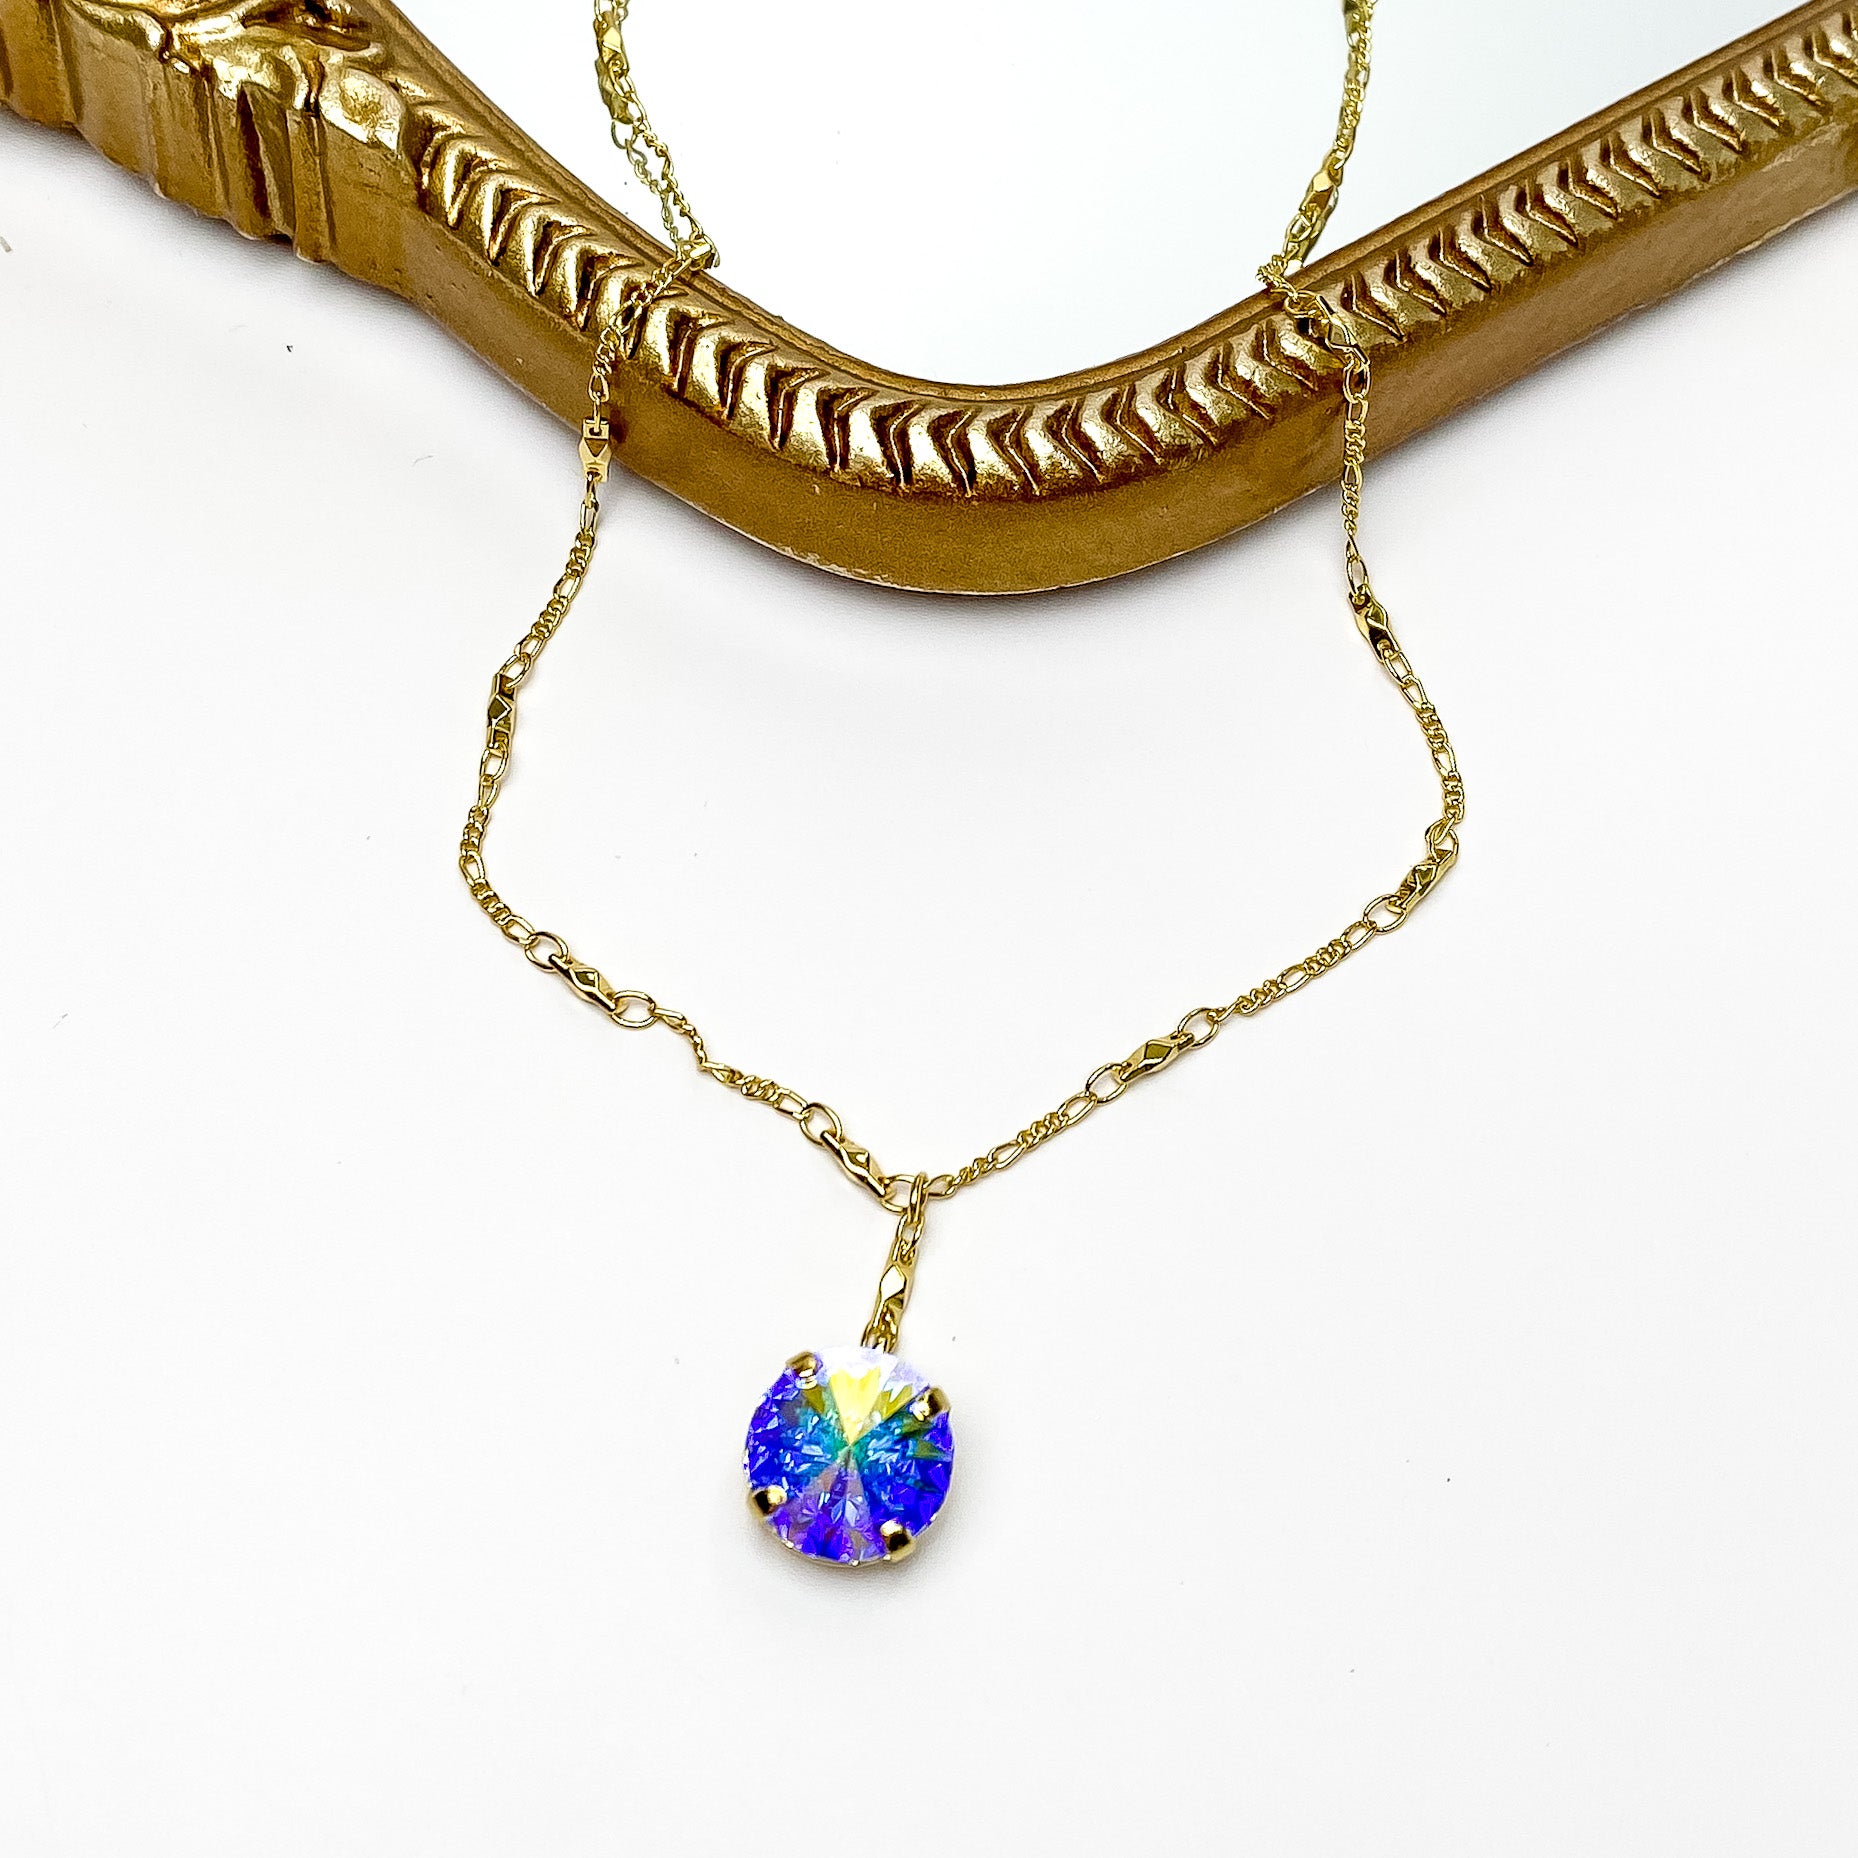 Pictured is a gold necklace with a ab crystal pendant. This necklace is pictured laying partially on a gold mirror on a white background. 